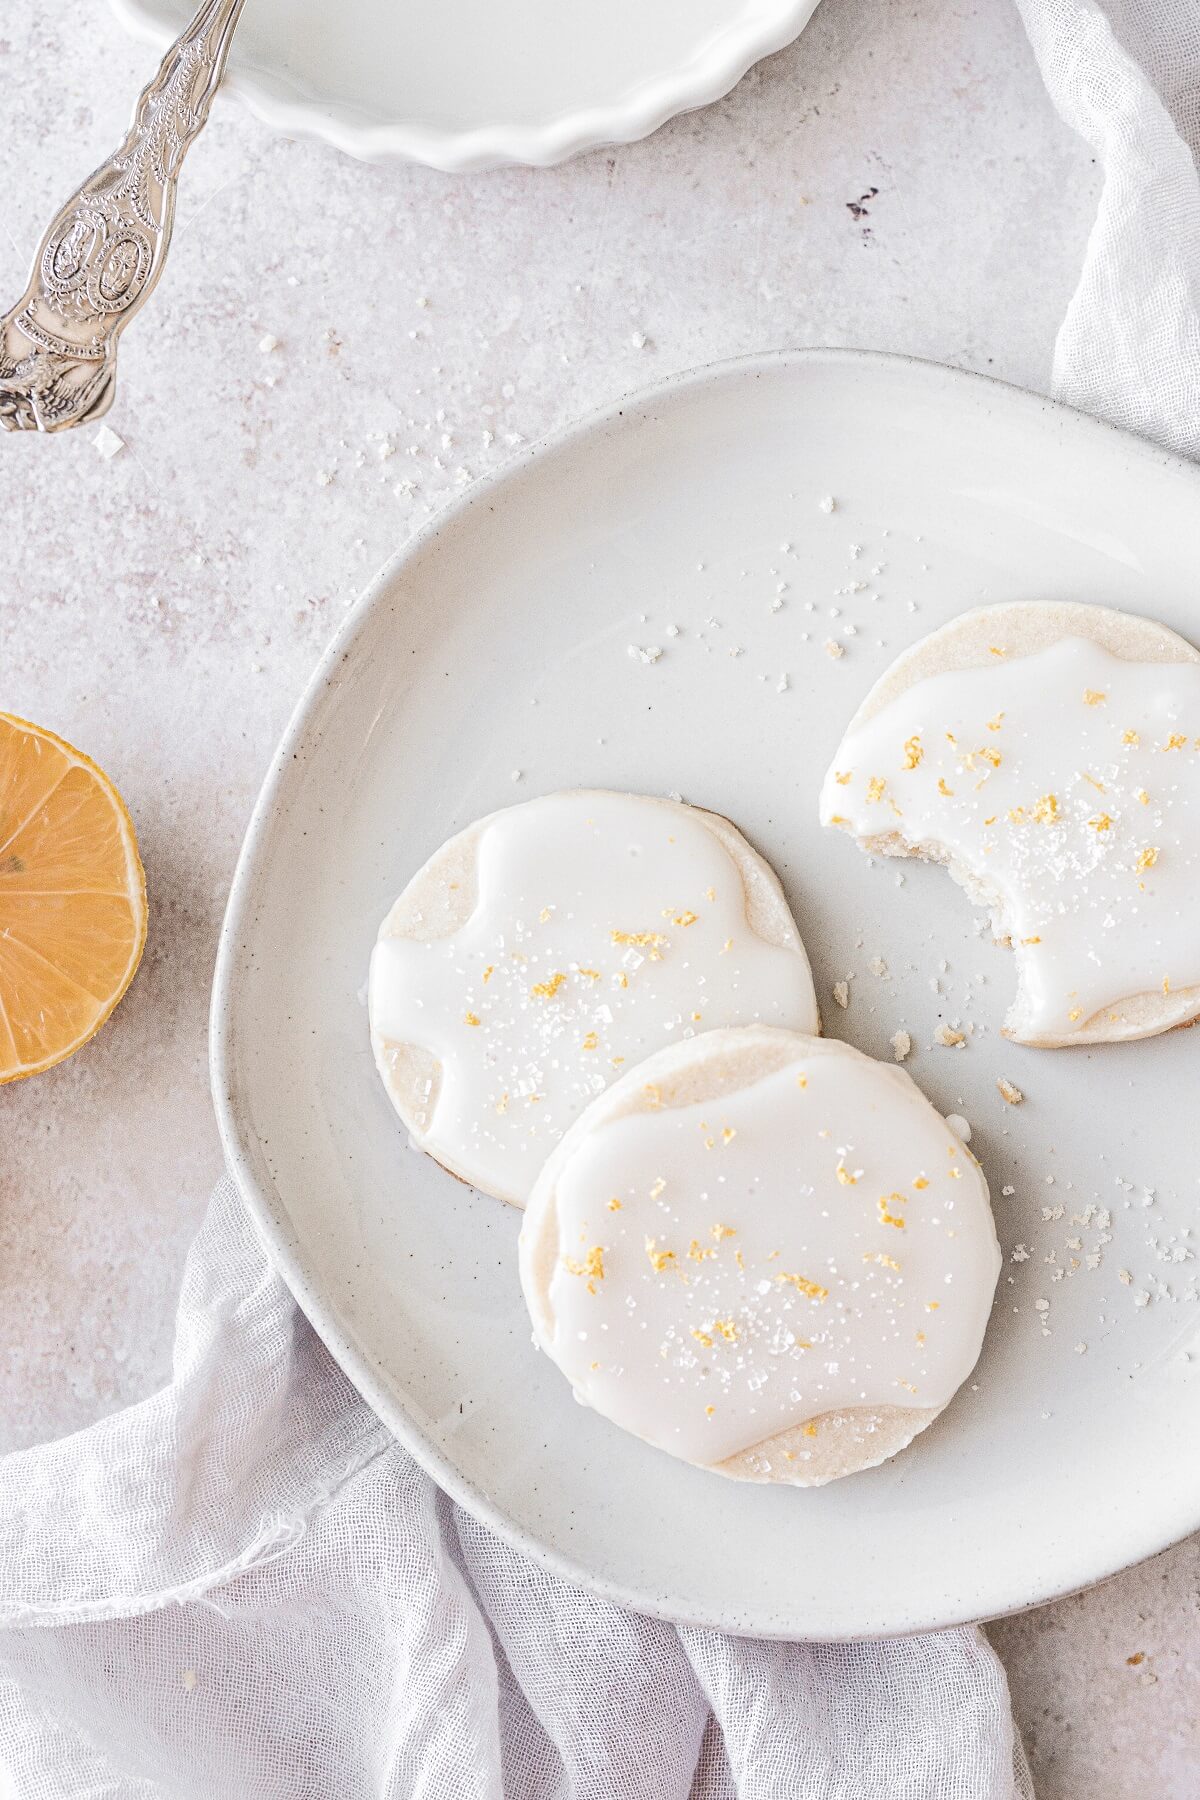 Iced lemon shortbread cookies with a bite taken out of one.